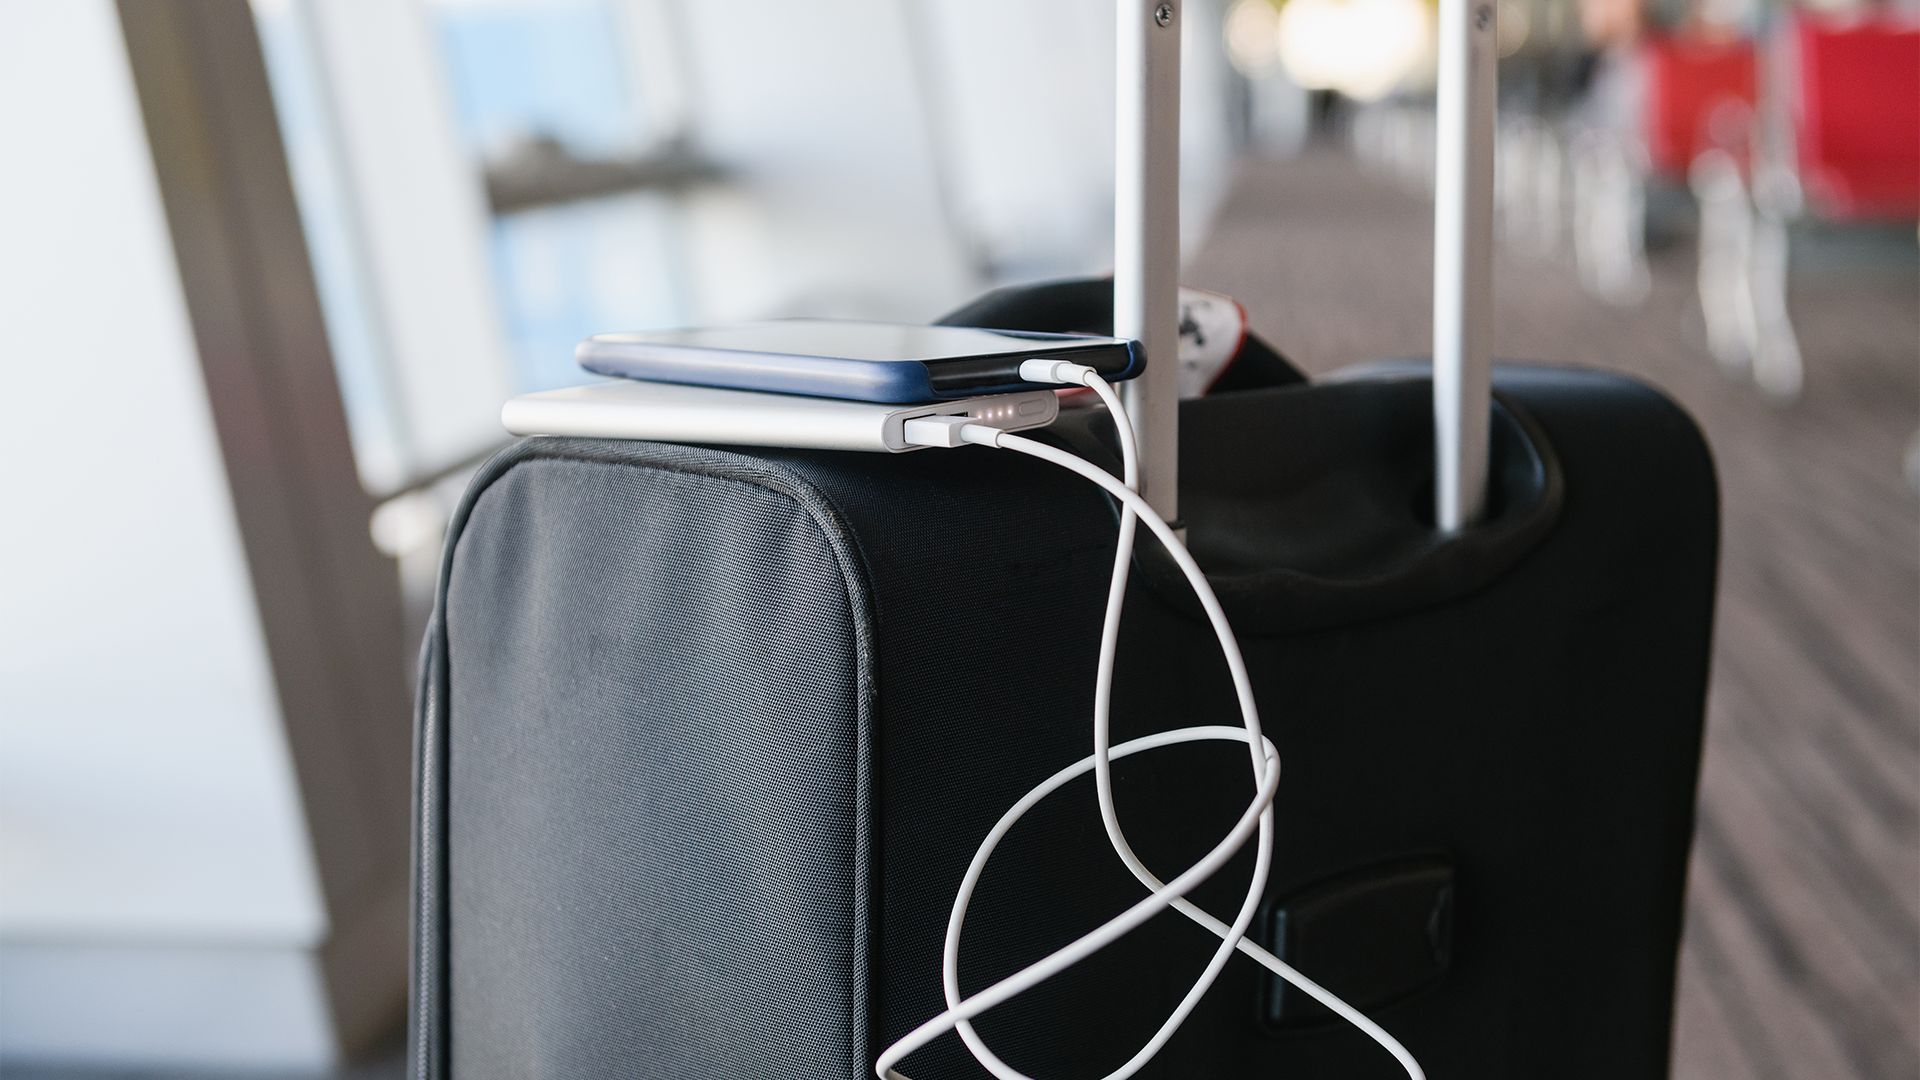 Smartphone charging from power bank on suitcase